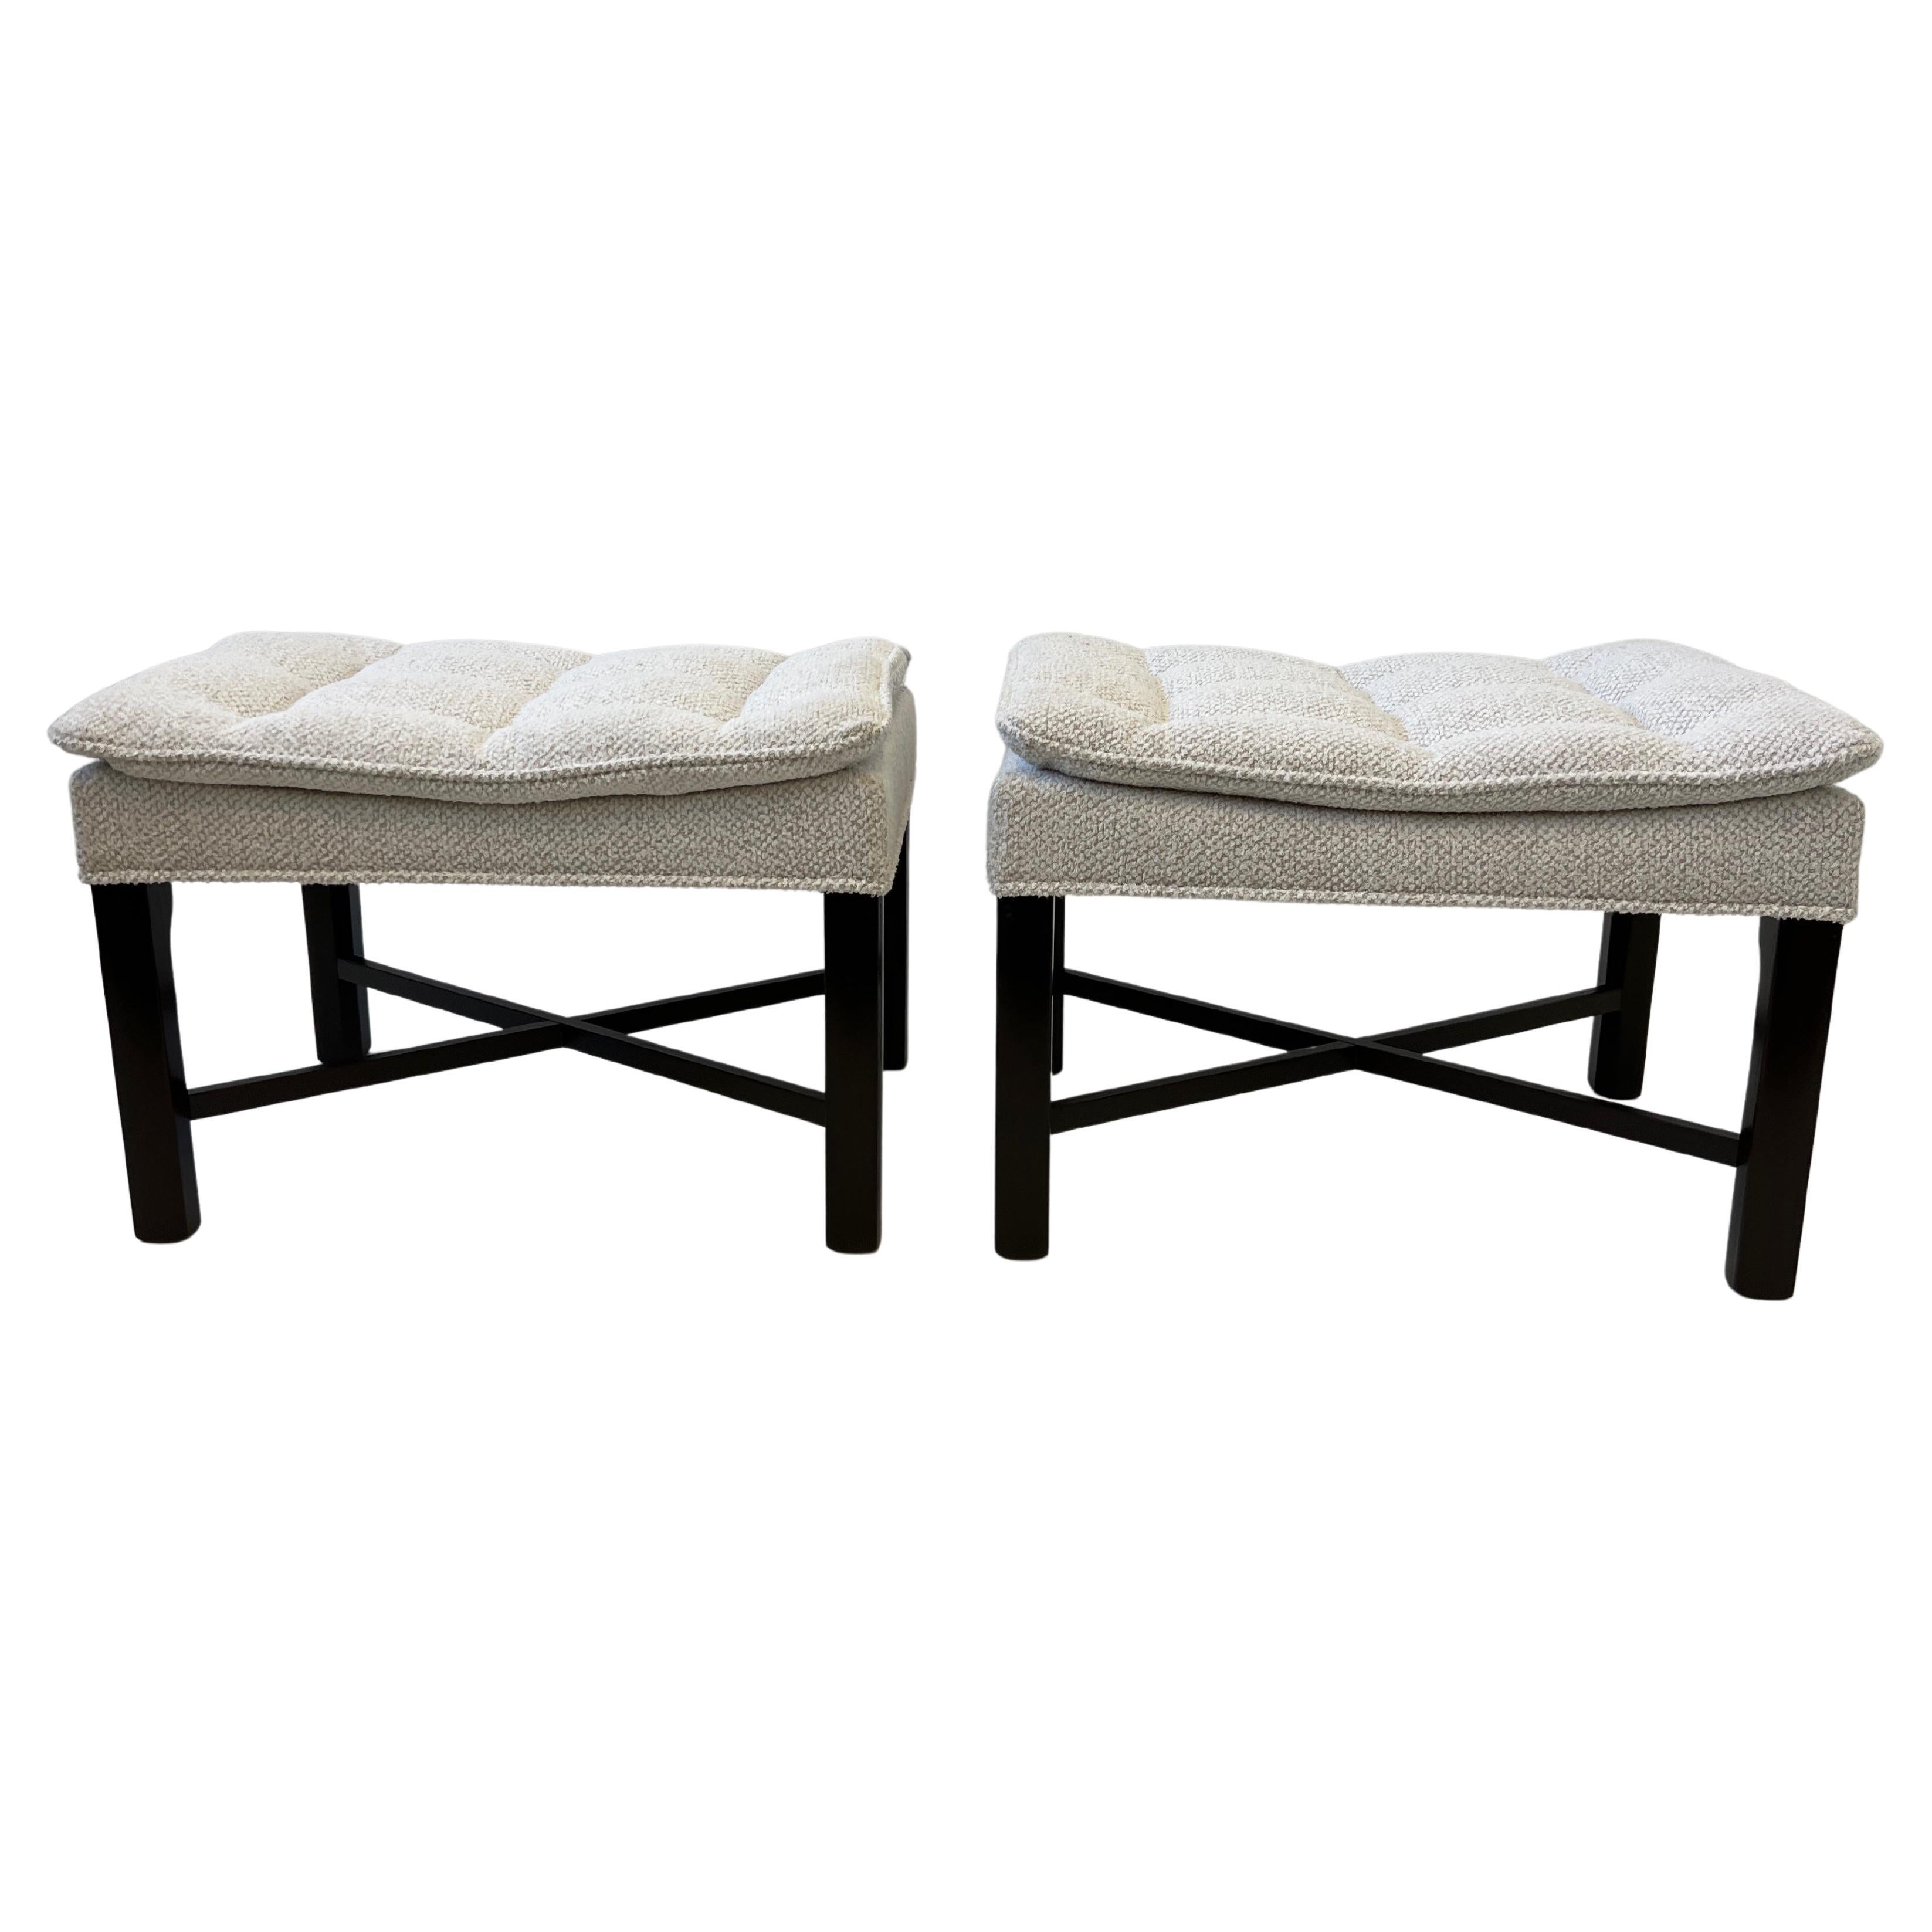 Pair of Walnut and Fabric Pillow Top Ottomans by Michael Taylor 